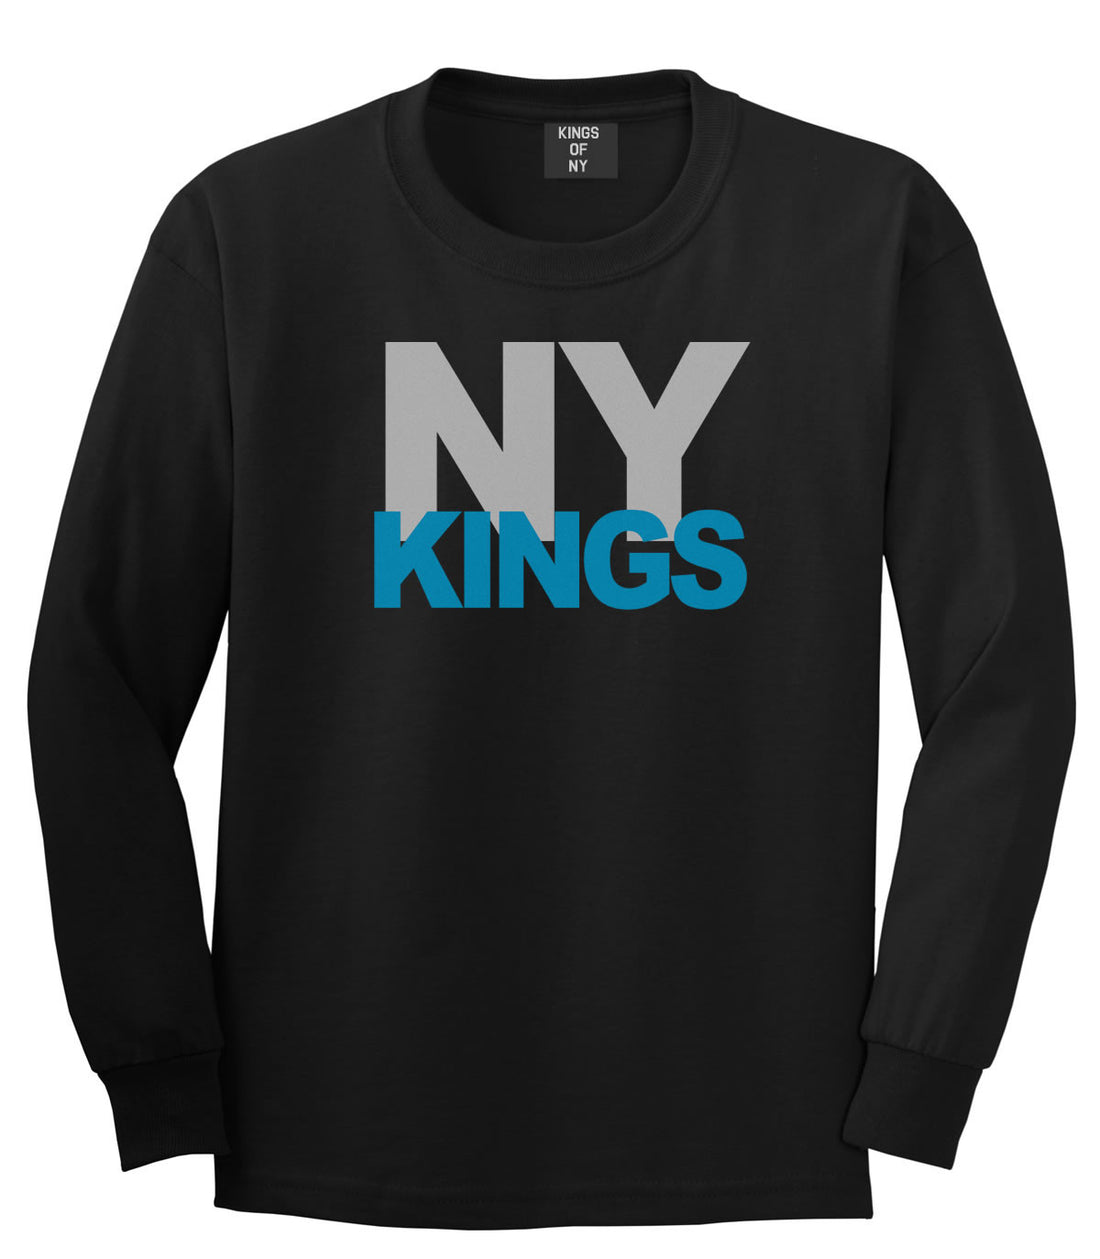 NY Kings Knows Long Sleeve T-Shirt in Black By Kings Of NY